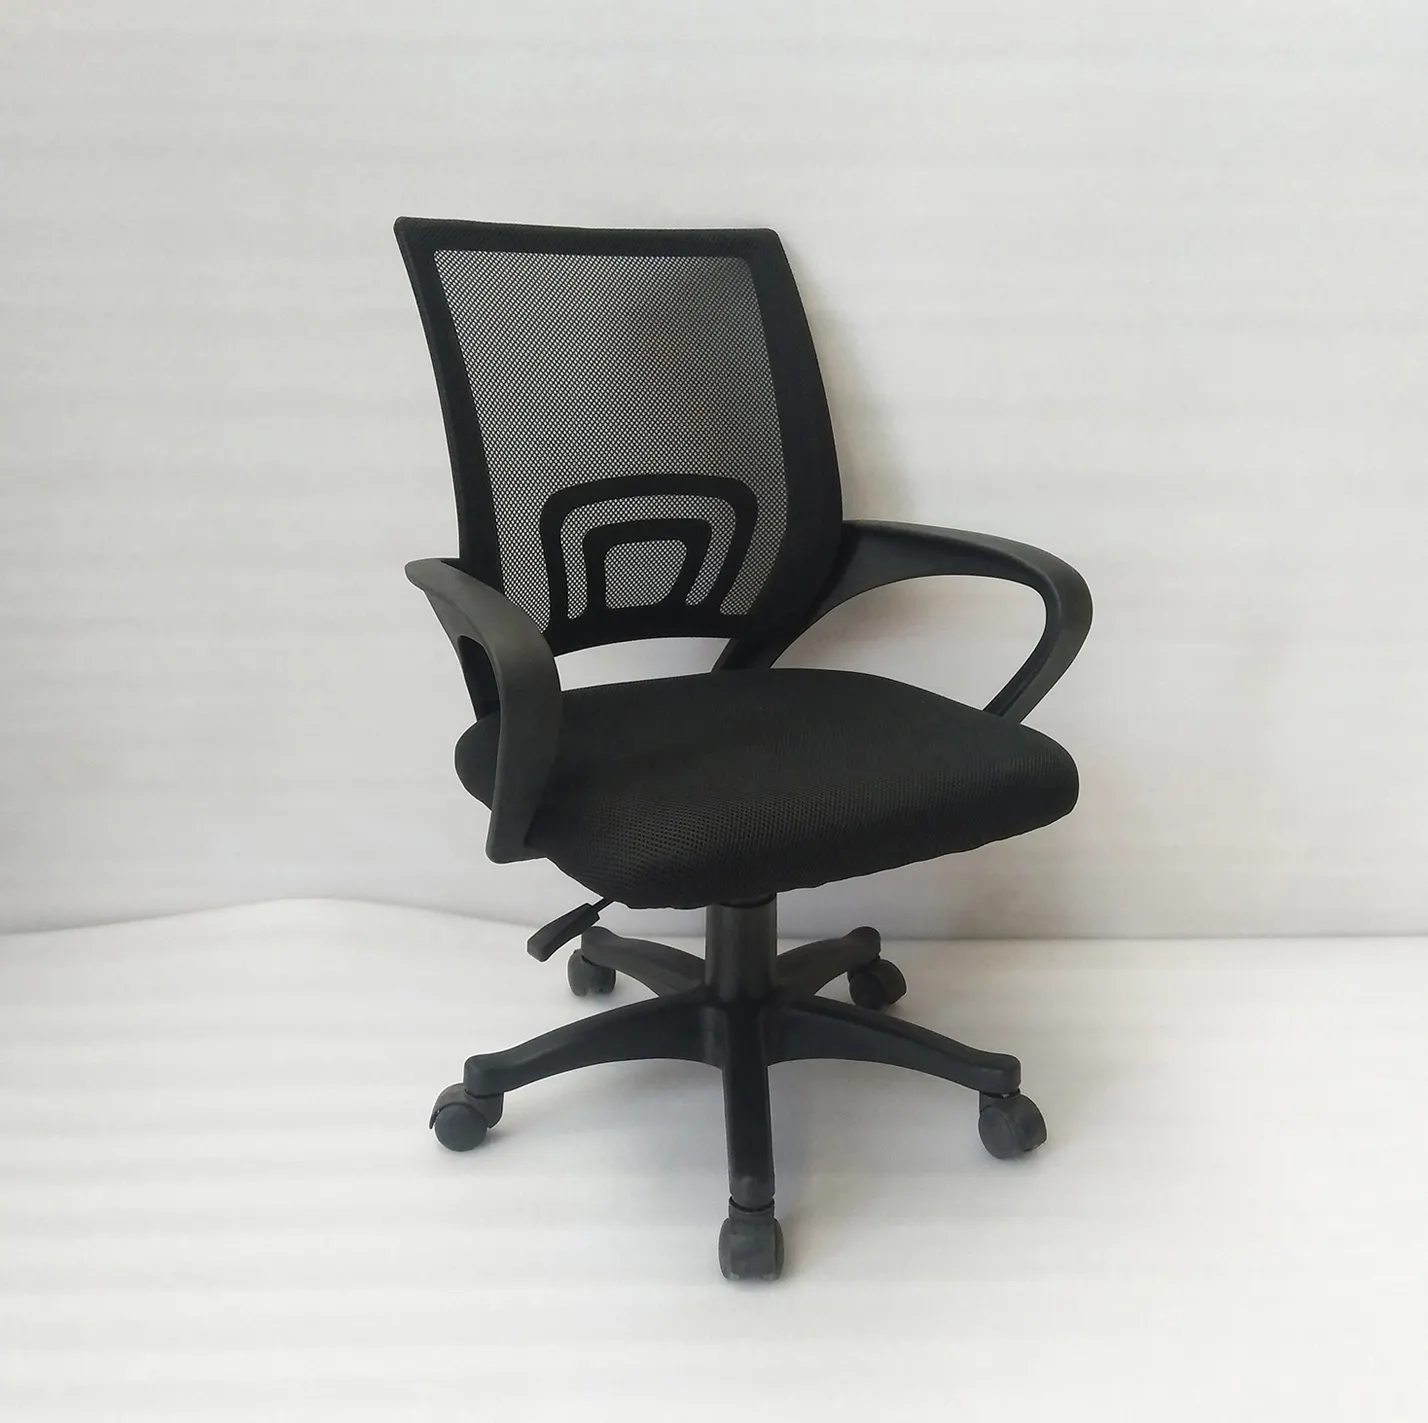 Designers Lumbar Support Alibaba Ergonomic Chairs Office Client Chairs